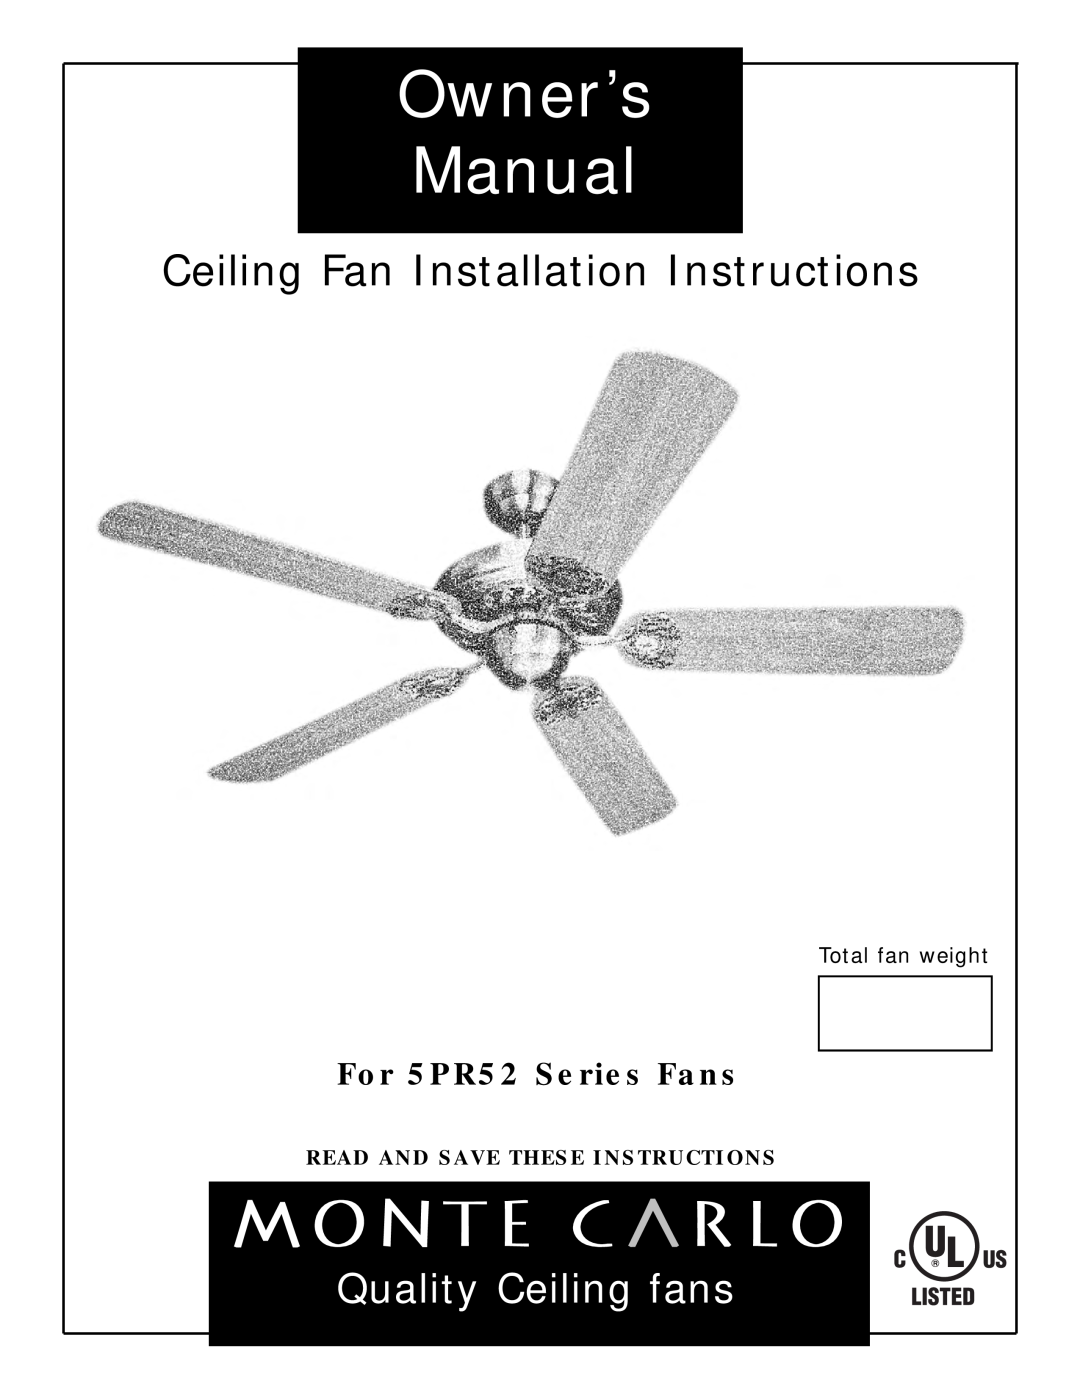 Monte Carlo Fan Company owner manual For 5PR52 Series Fans, Total fan weight, Read And Save These Instructions 